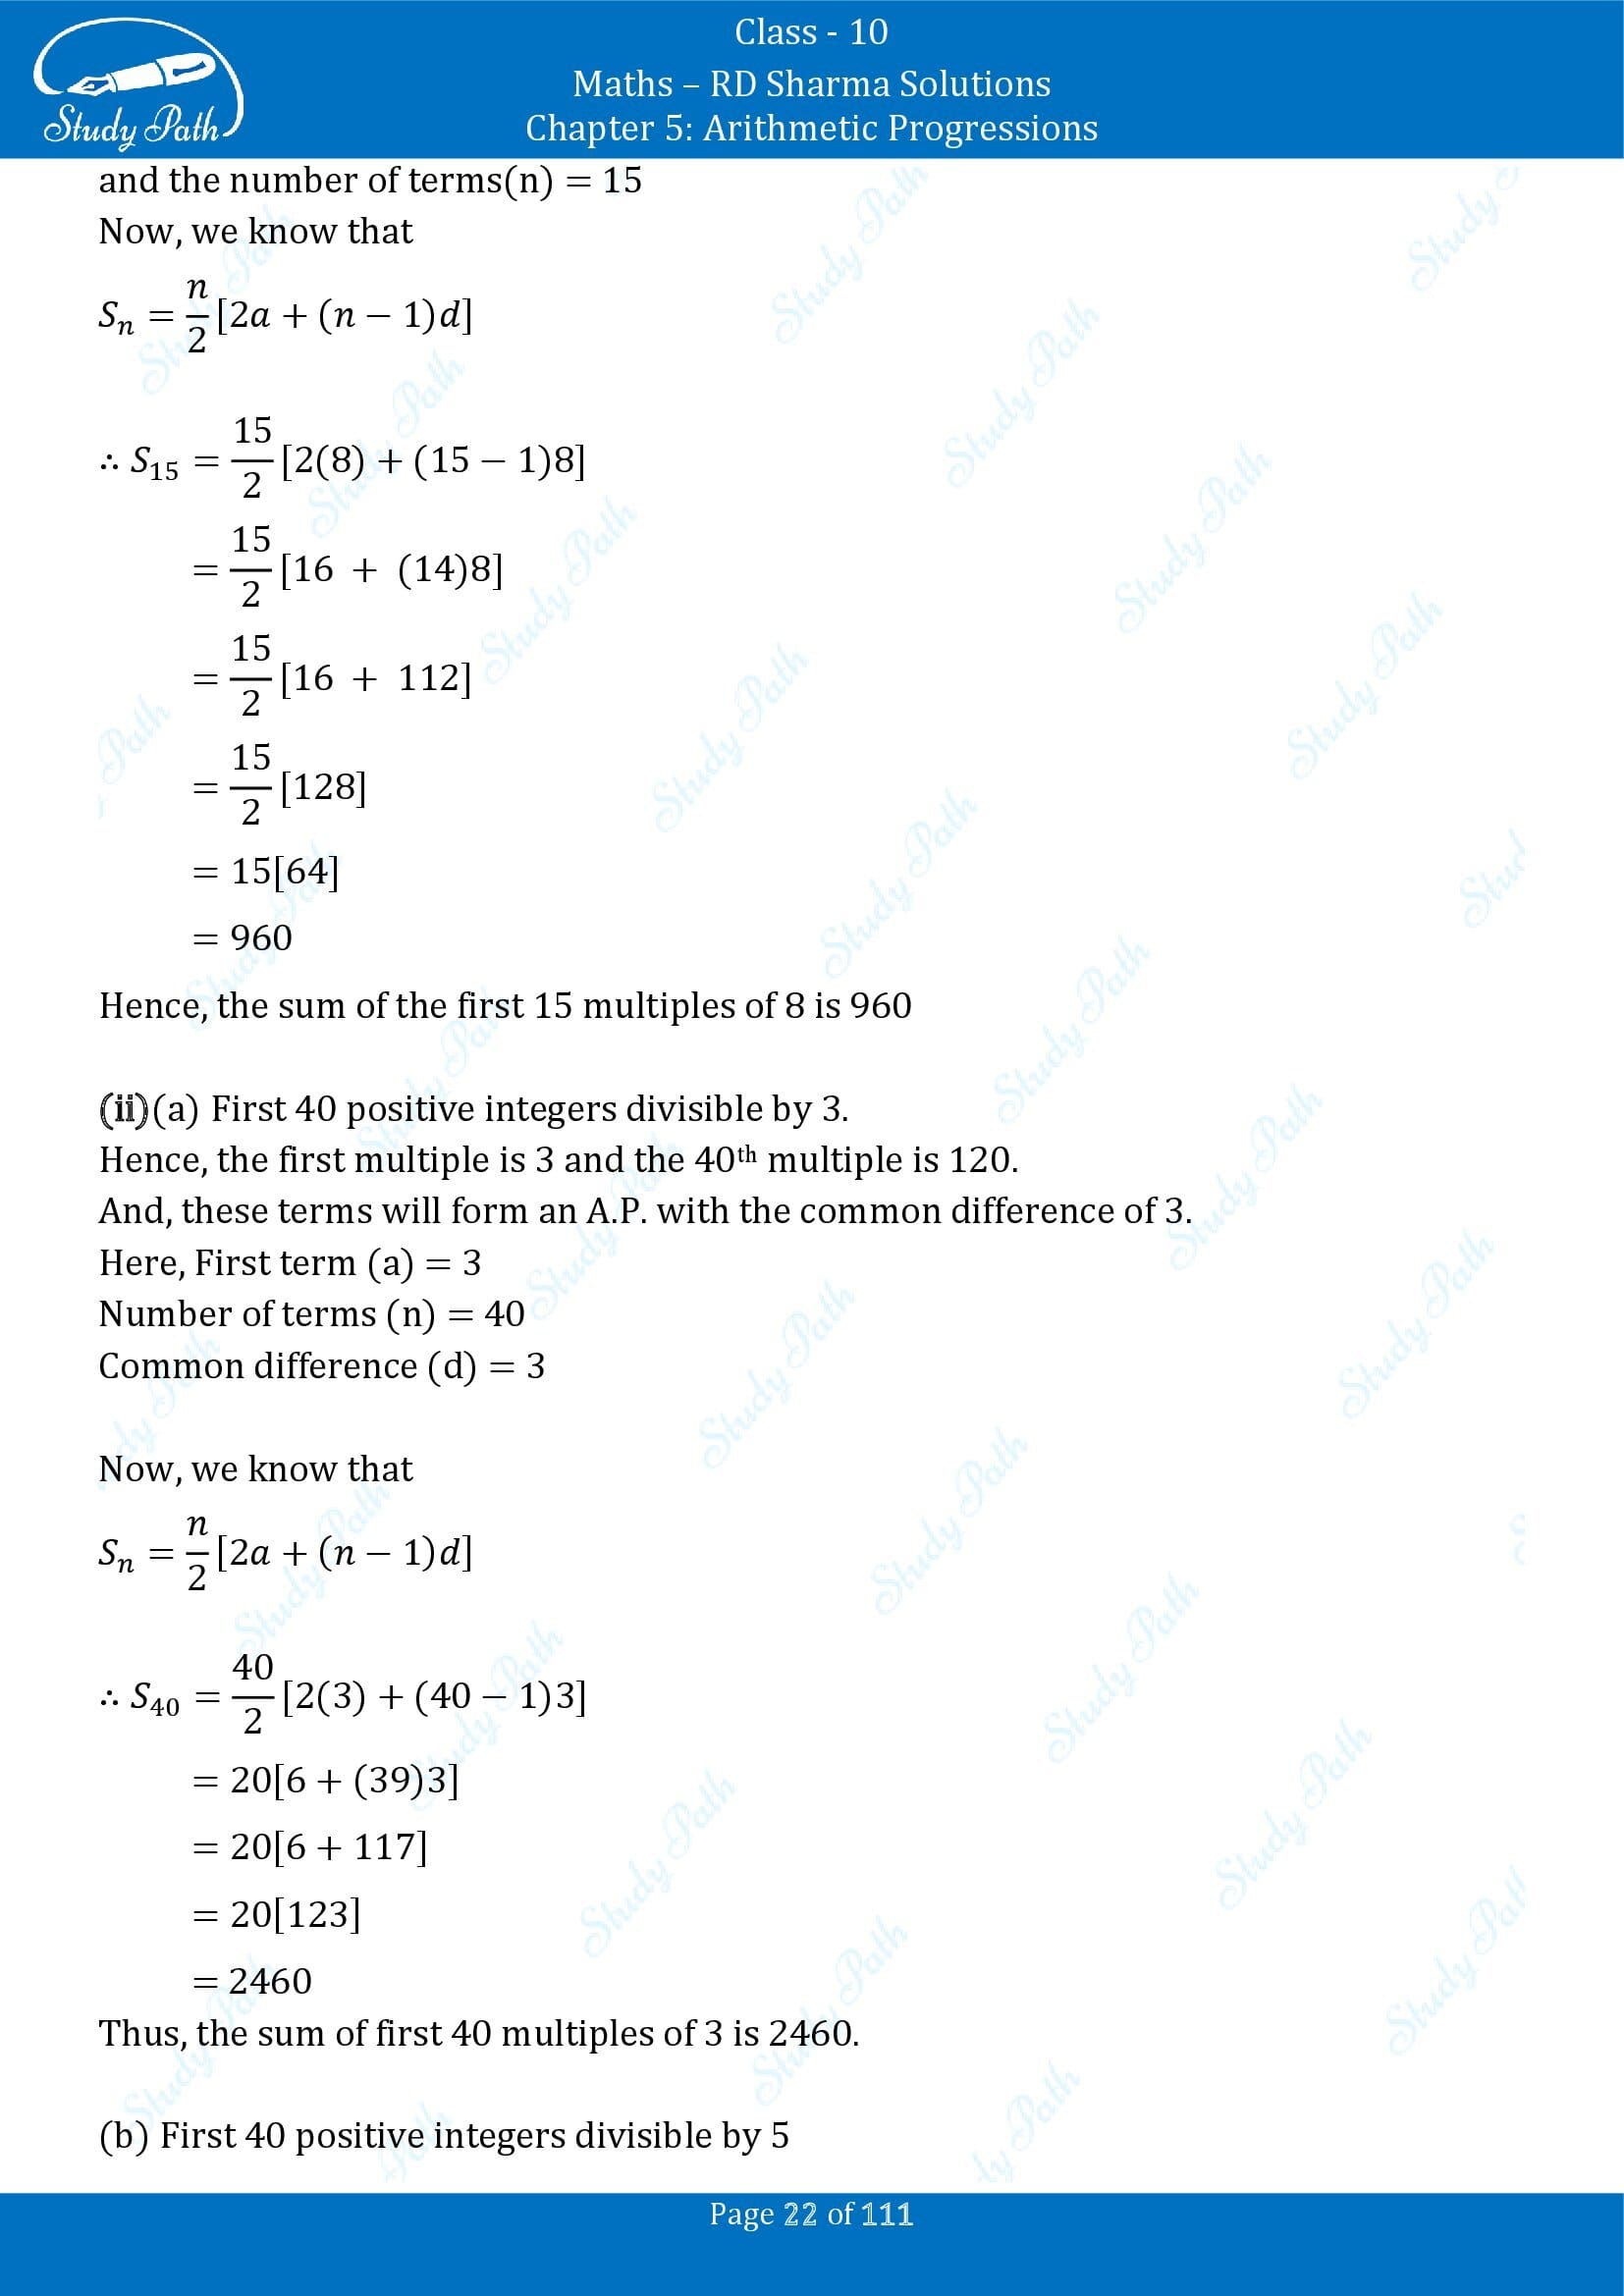 RD Sharma Solutions Class 10 Chapter 5 Arithmetic Progressions Exercise 5.6 00022